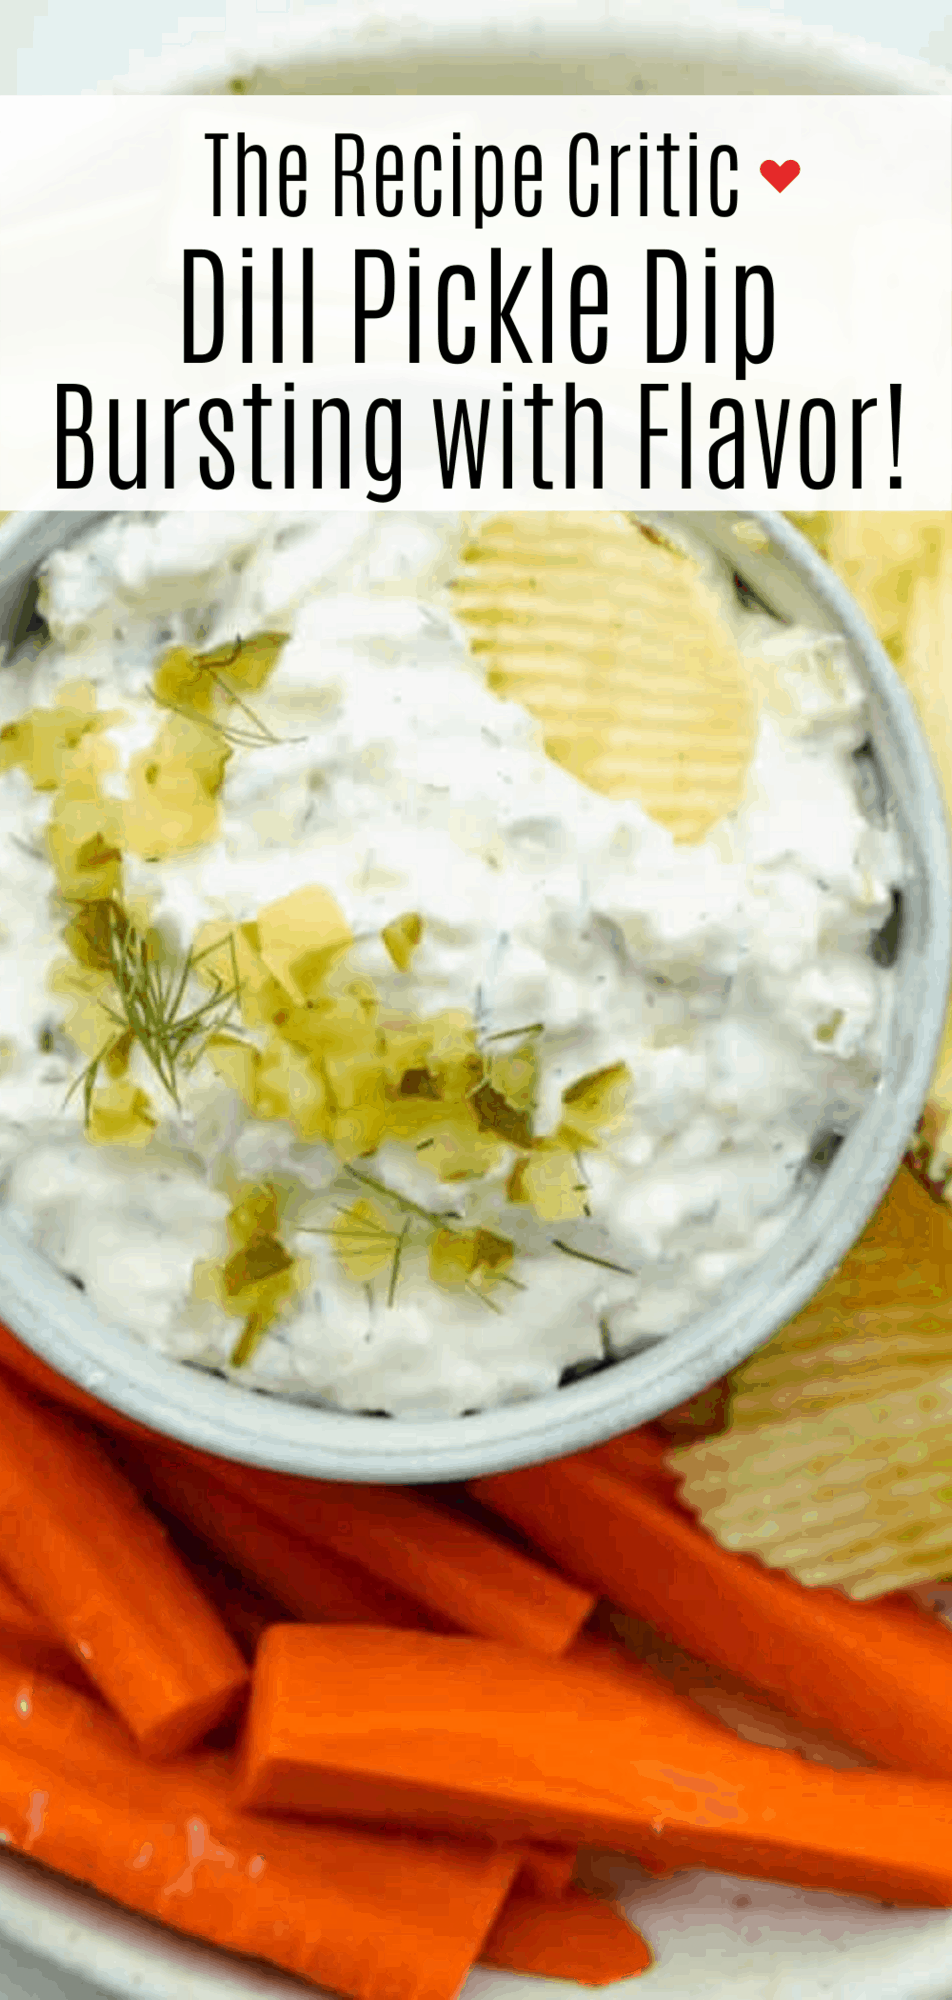 Quick and Easy Dill Pickle Dip Recipe